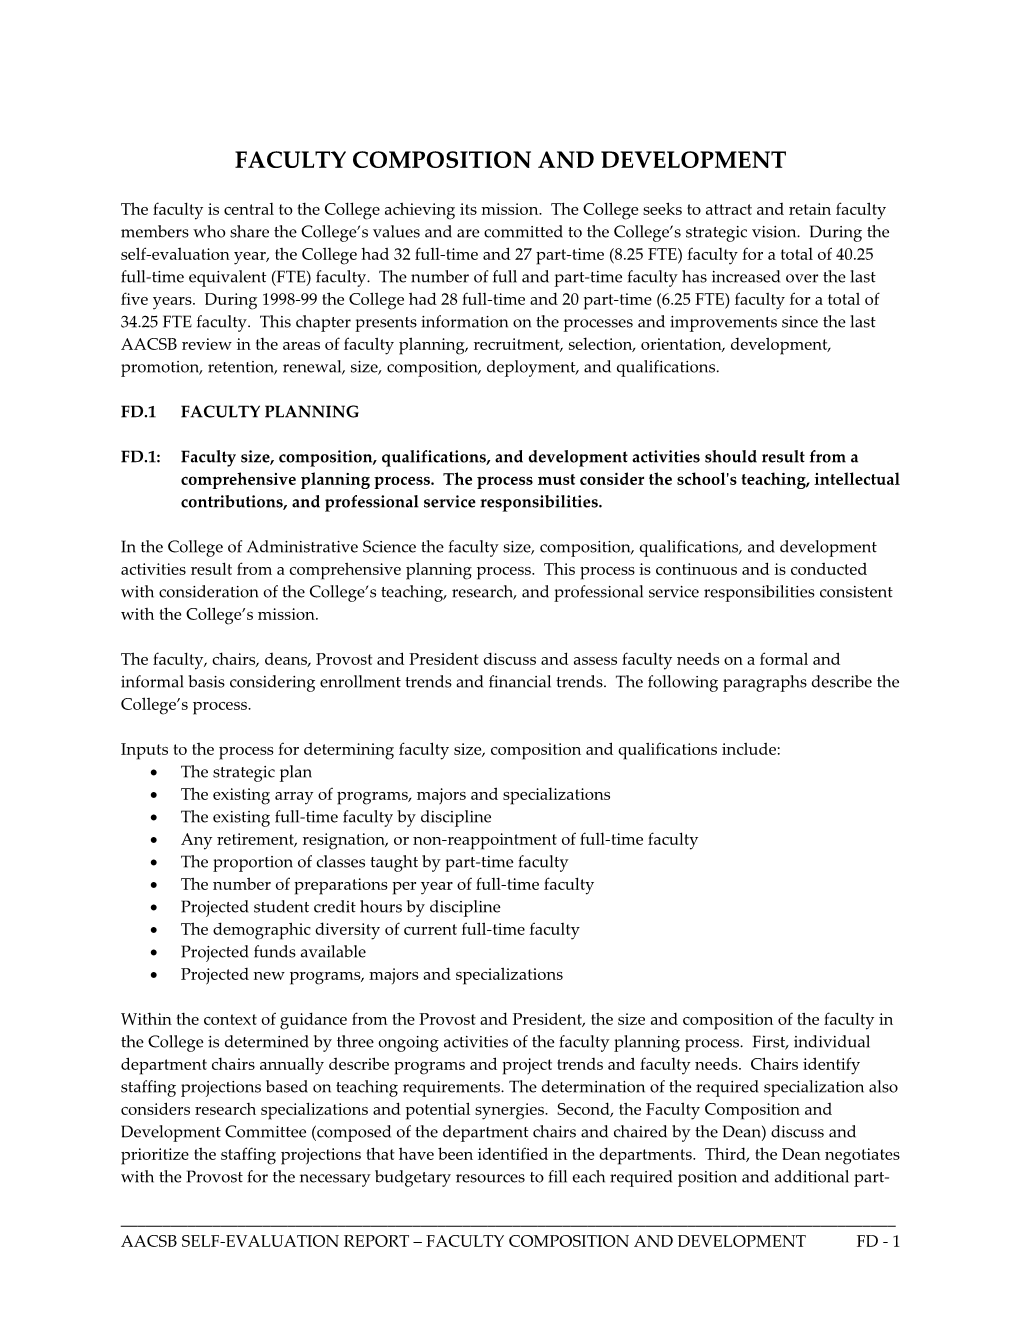 Faculty Composition and Development